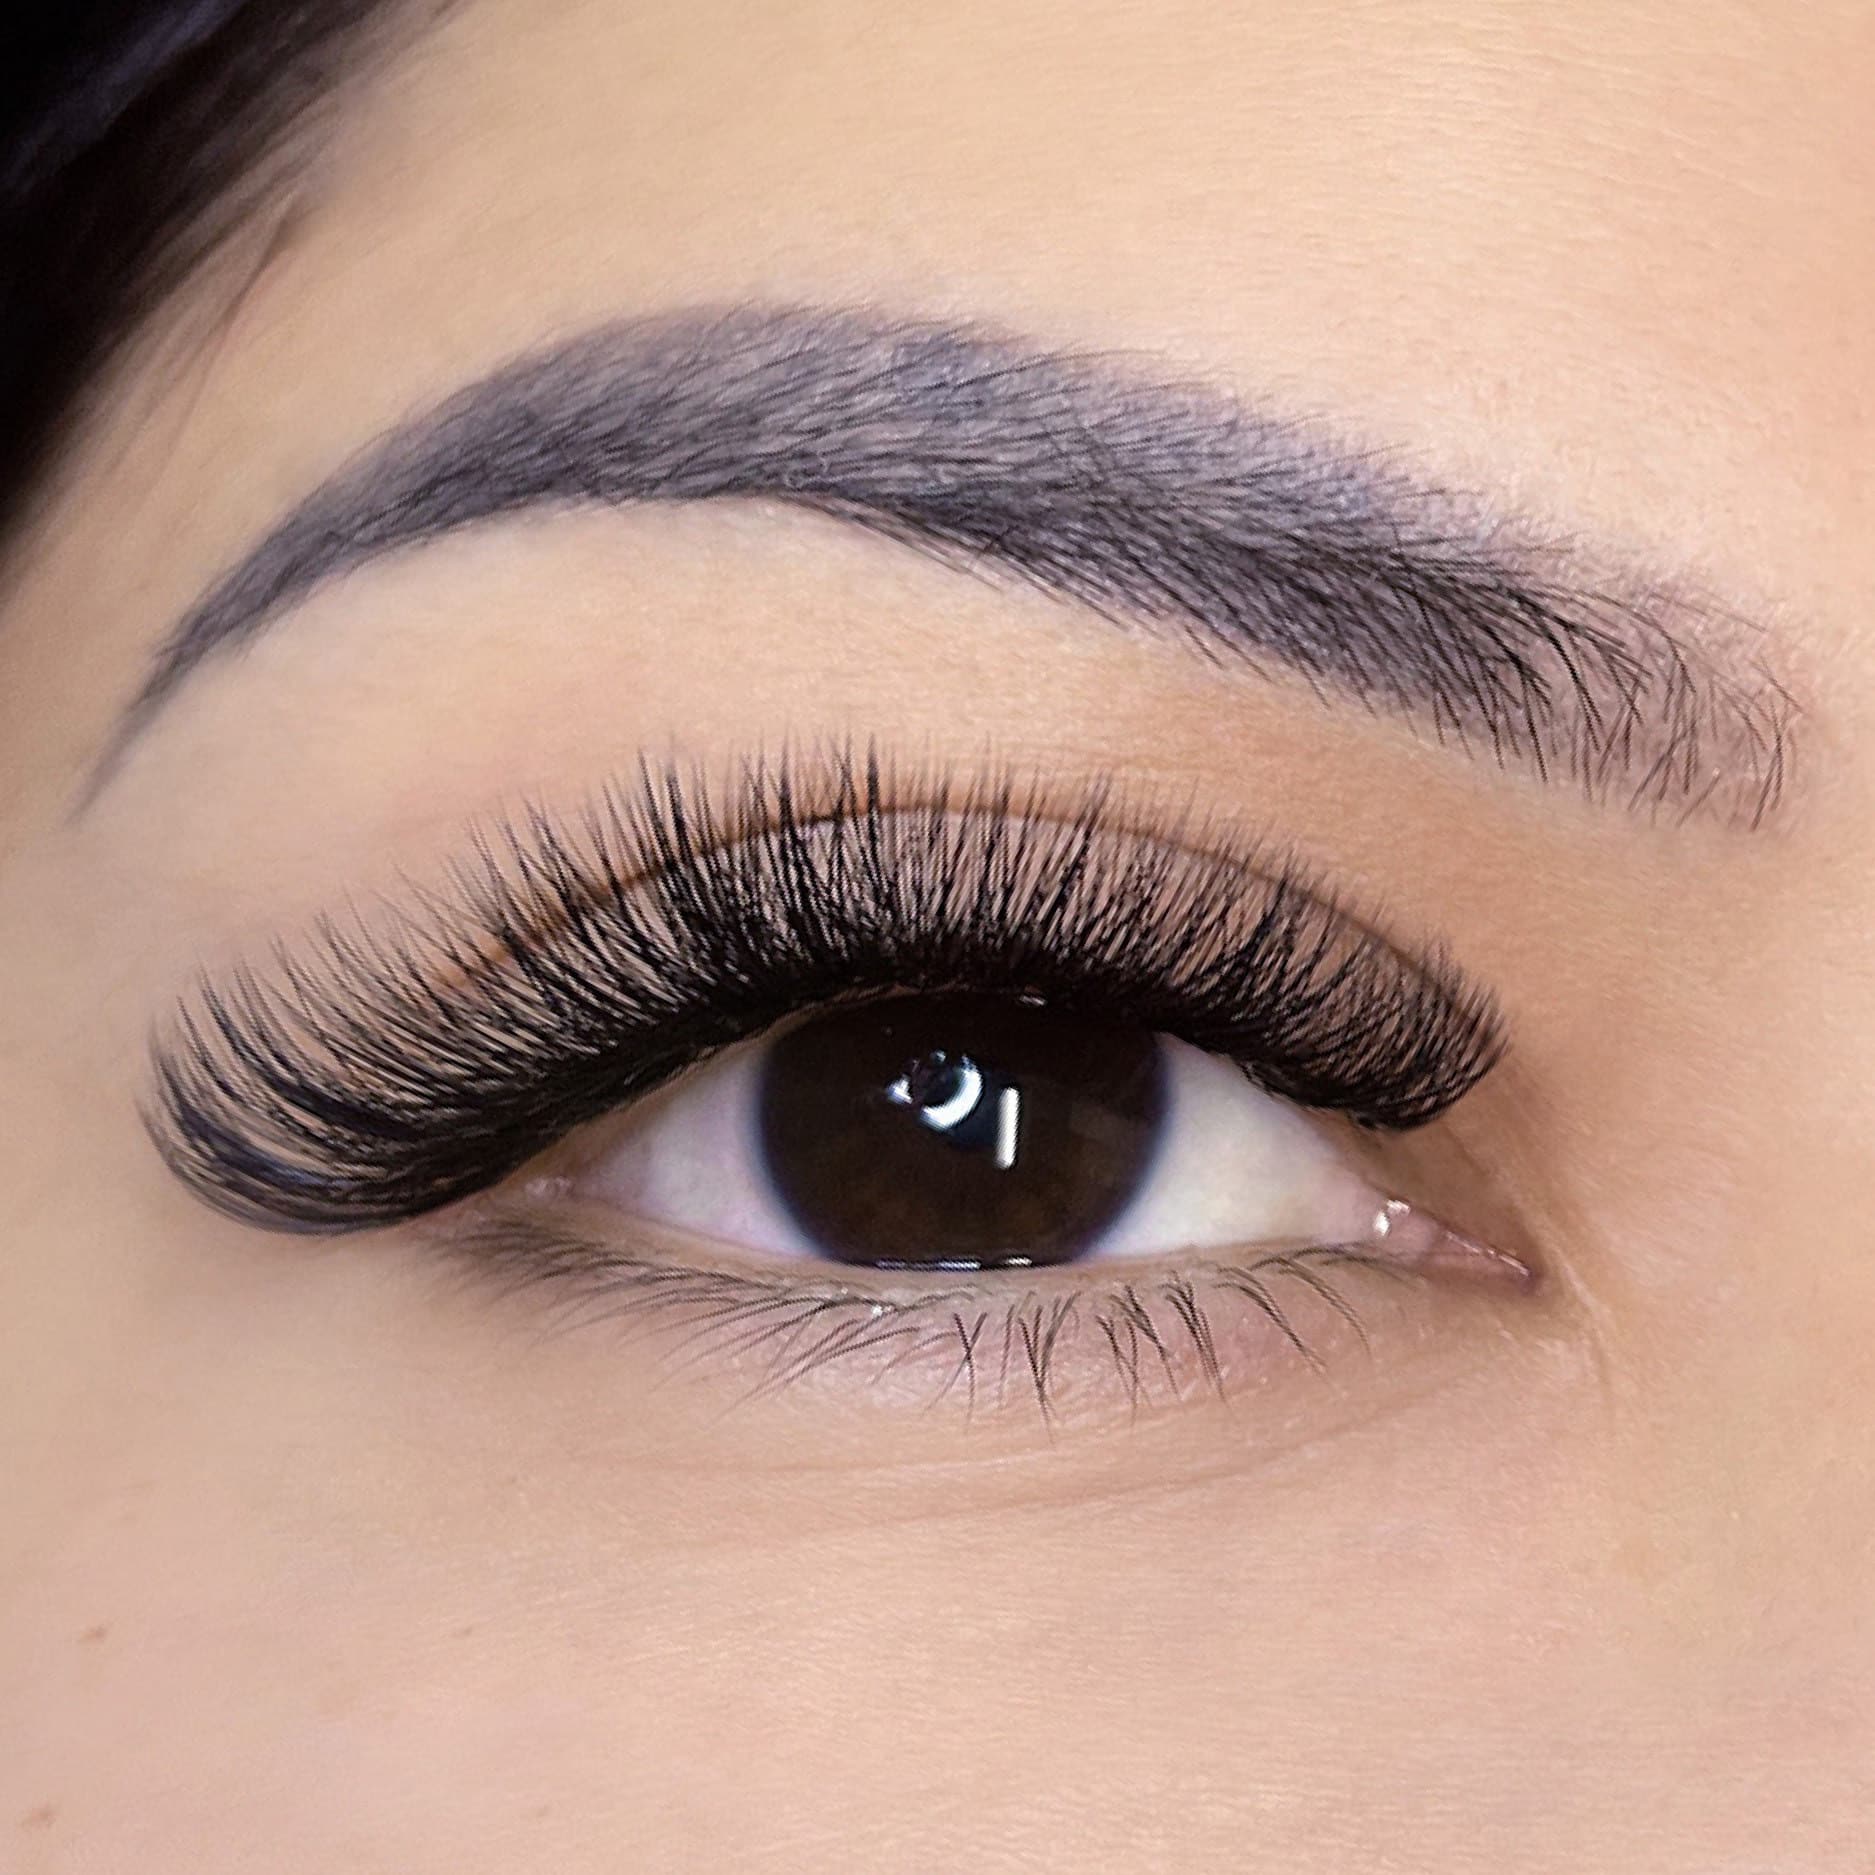 A close up of a woman's eye with lash extensions that give her eye a naturally lifted look